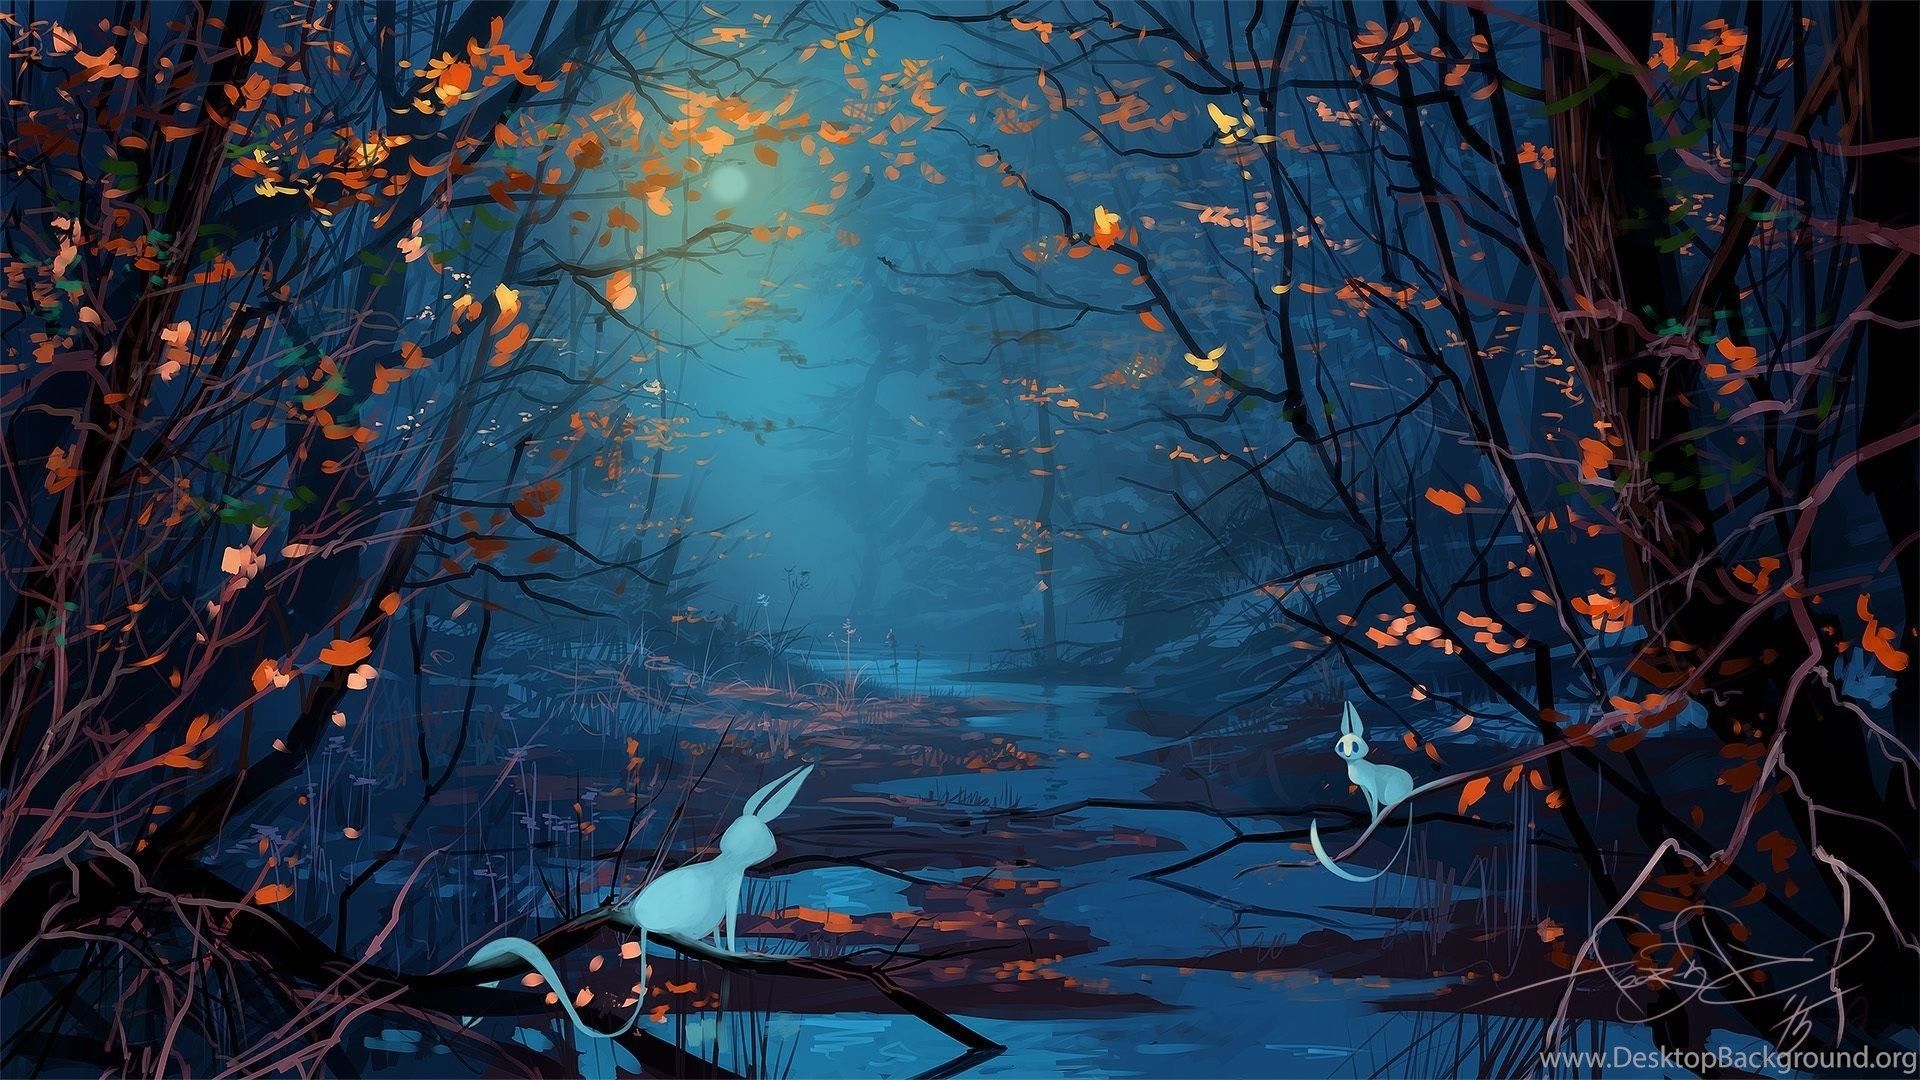 Forest At Night Painting Wallpaper HD Download For Desktop